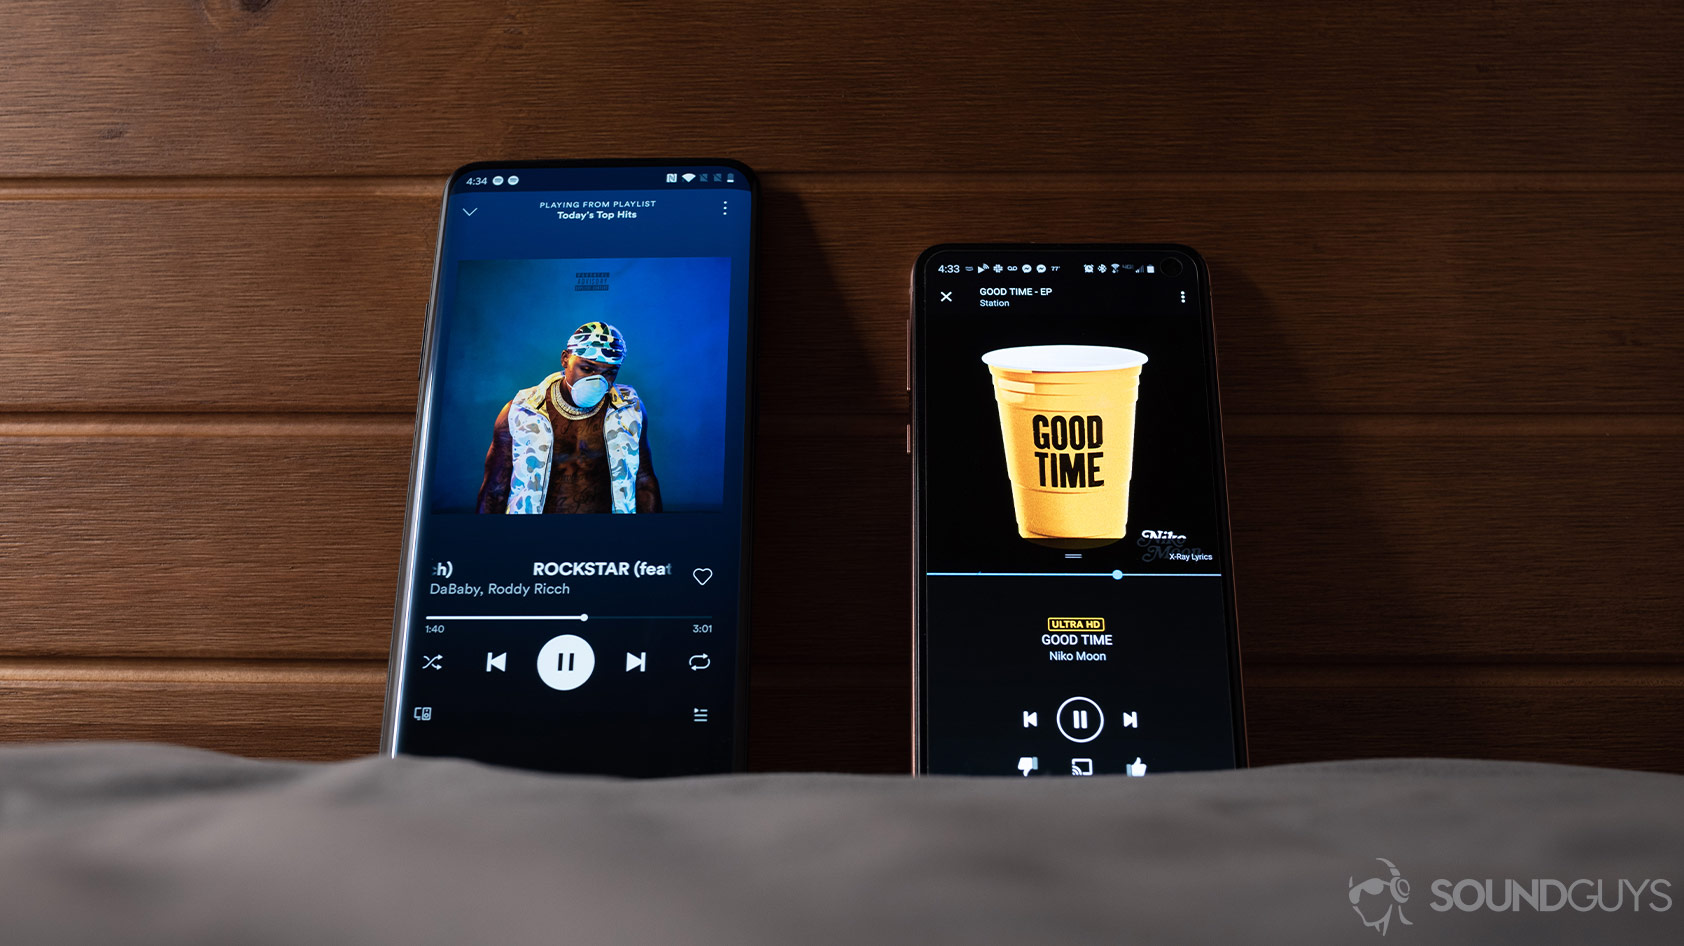 Amazon Music HD vs Spotify Premium music streaming services pulled up on two smartphones against a wood headboard.